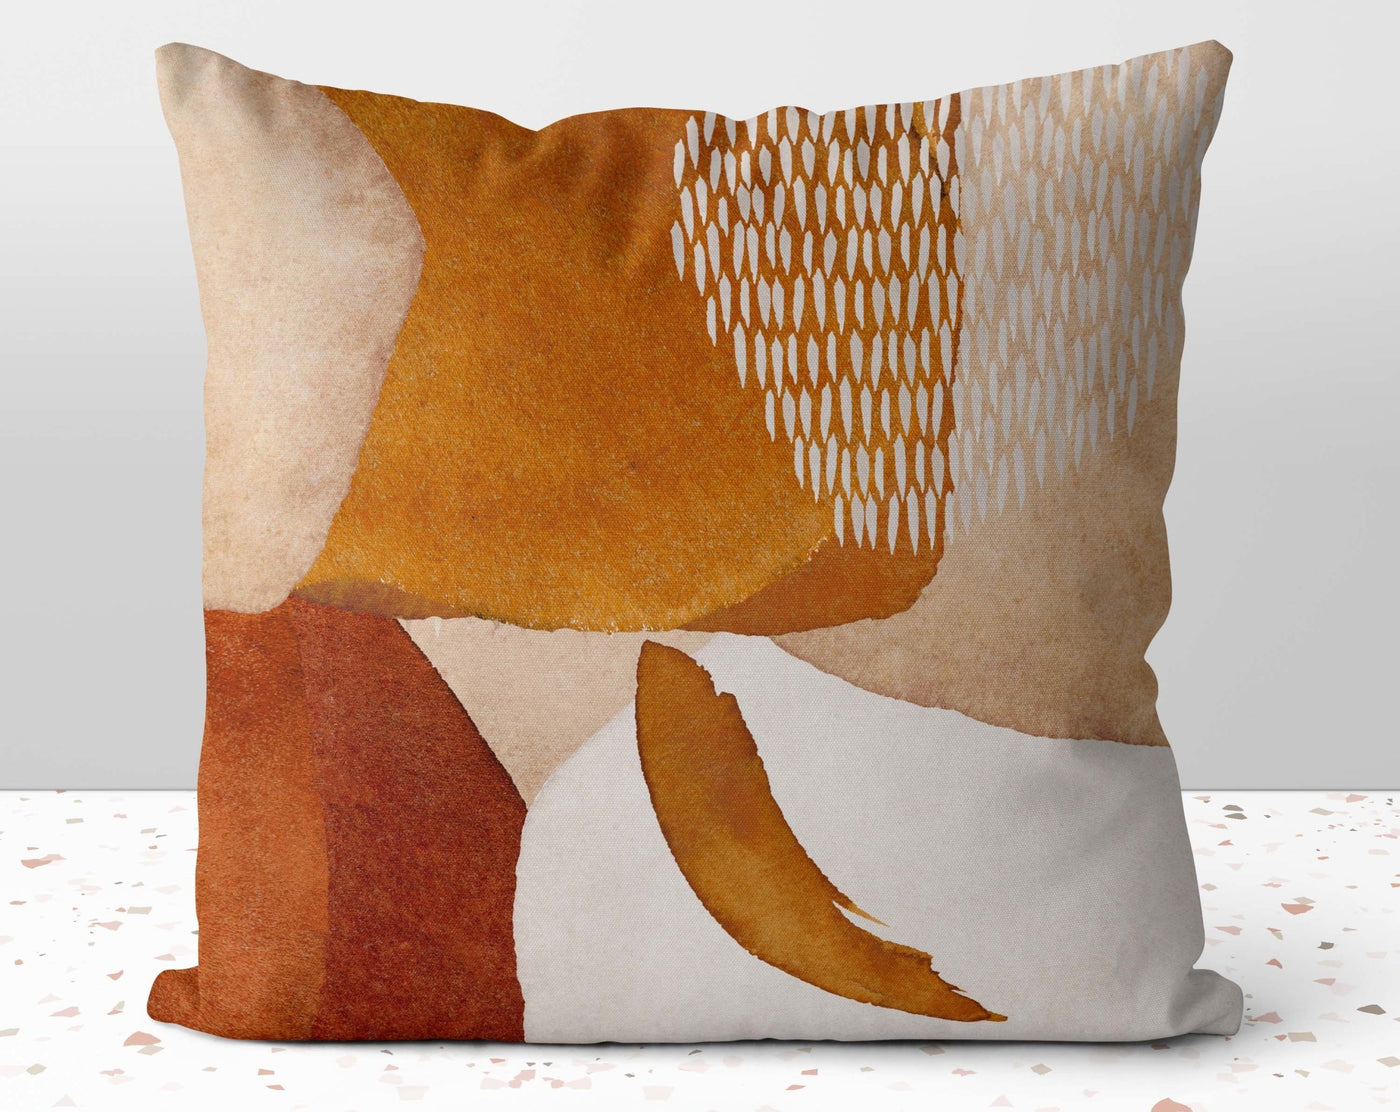 Boho Glam Shapes Brown Accents Pillow Throw Cover with Insert - Cush Potato Pillows